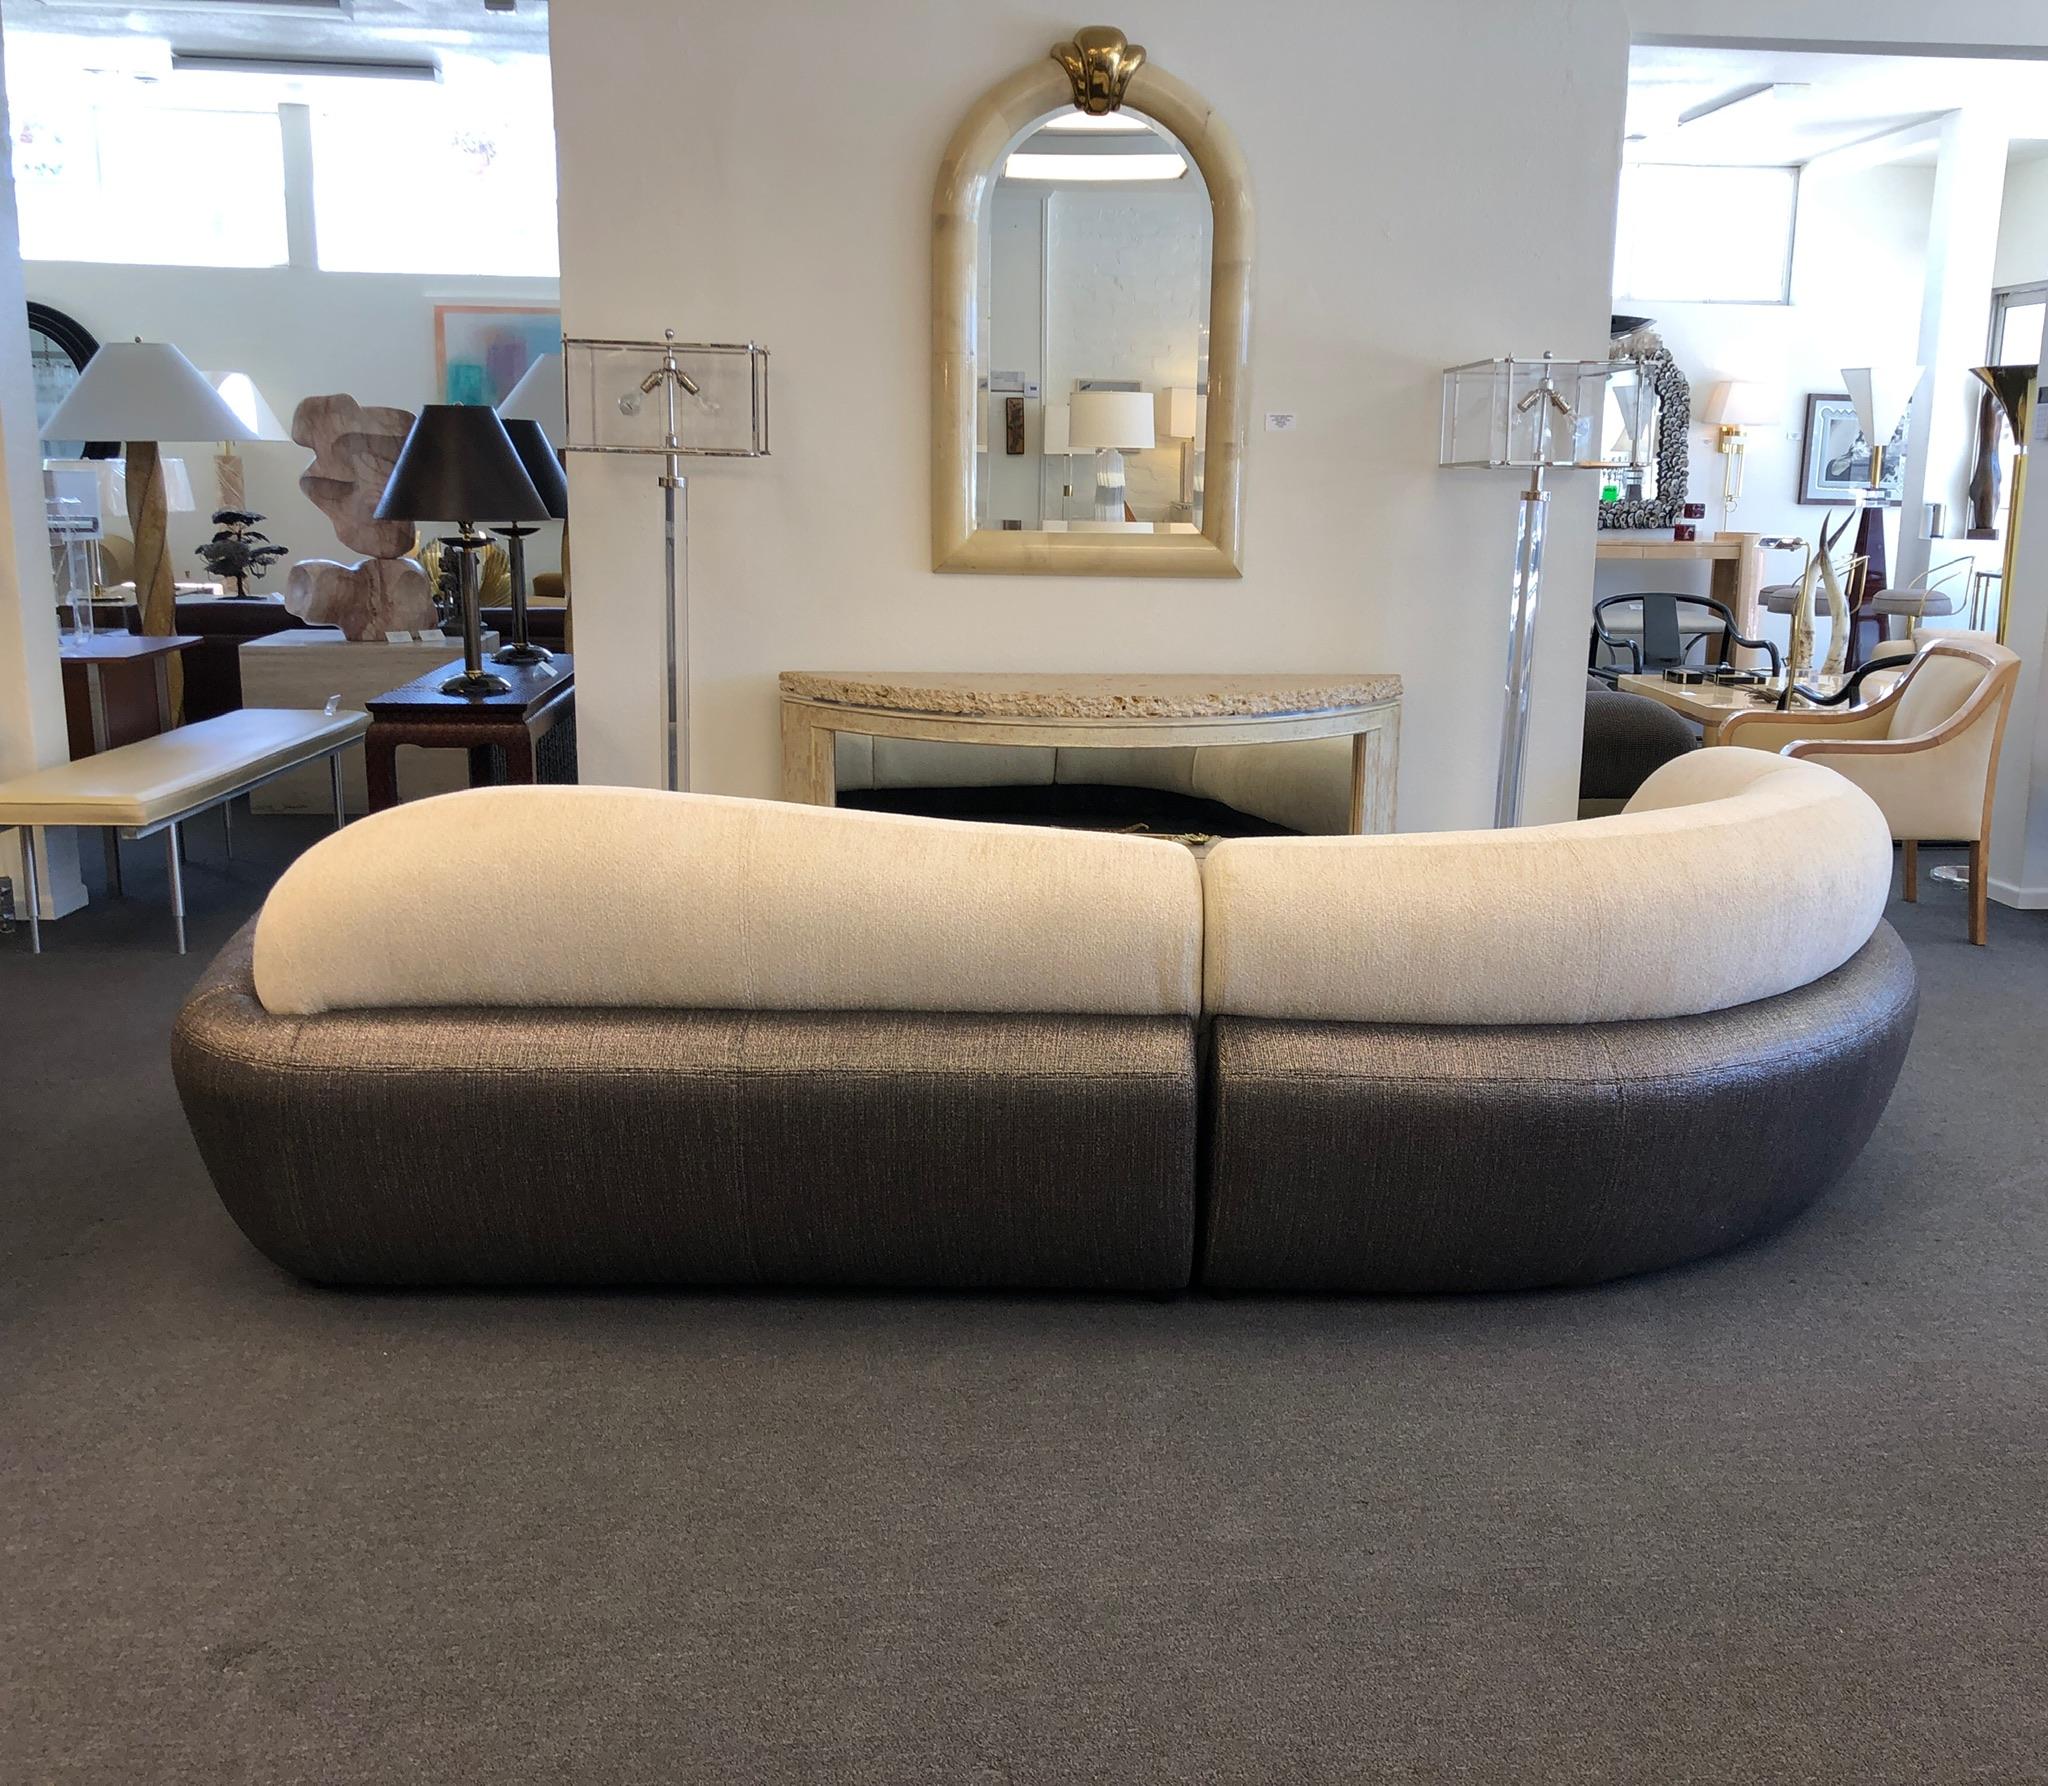 Late 20th Century Off White and Brown Freeform Sectional Sofa